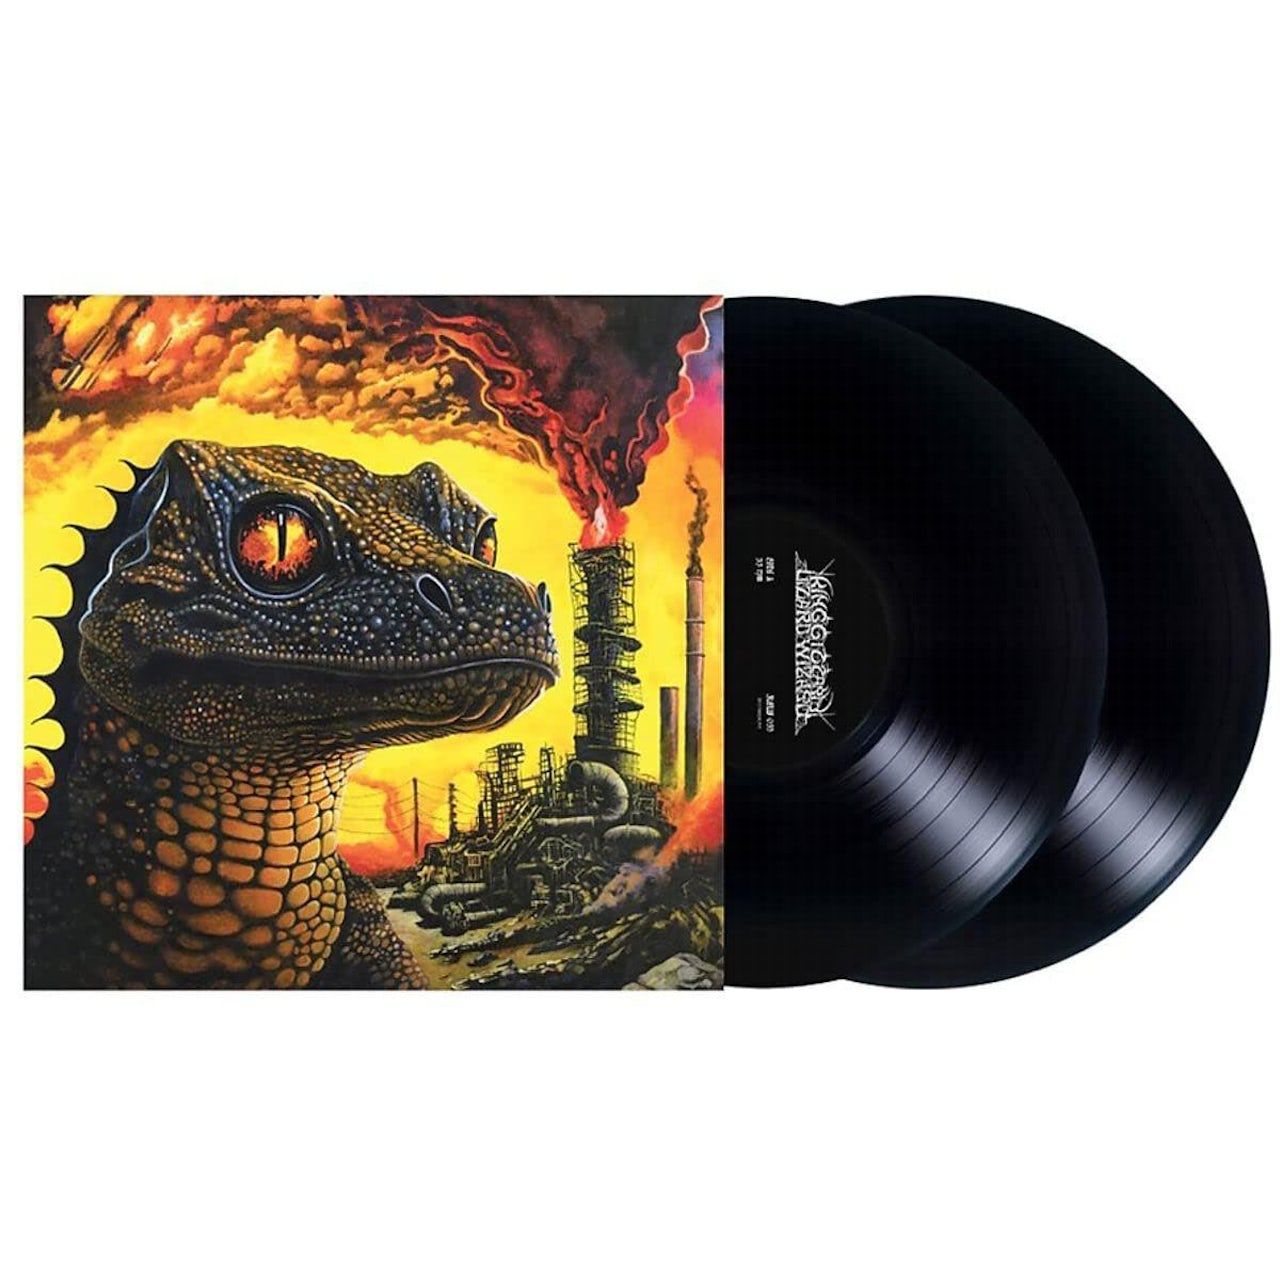 0842812189524, Виниловая пластинка King Gizzard & The Lizard Wizard, Petrodragonic Apocalypse; Or, Dawn Of Eternal Night: An Annihilation Of Planet Earth And The Beginning Of Merciless Damnation (coloured) виниловая пластинка king gizzard and the lizard wizard – chunky shrapnel 2lp